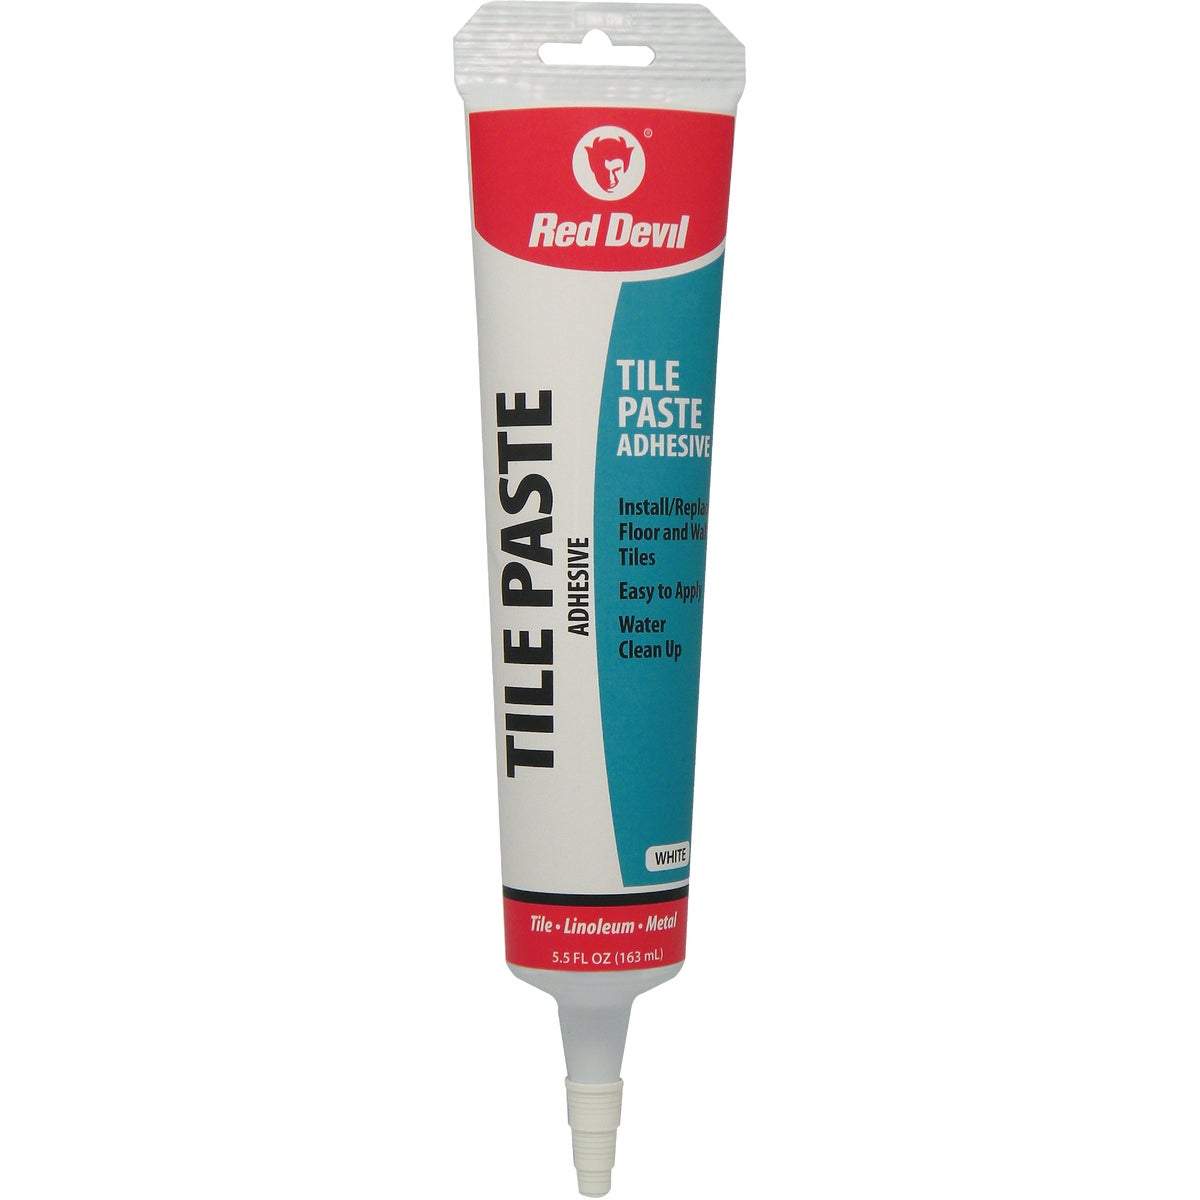 Item 404527, An acrylic, water based adhesive for permanently bonding many types of 